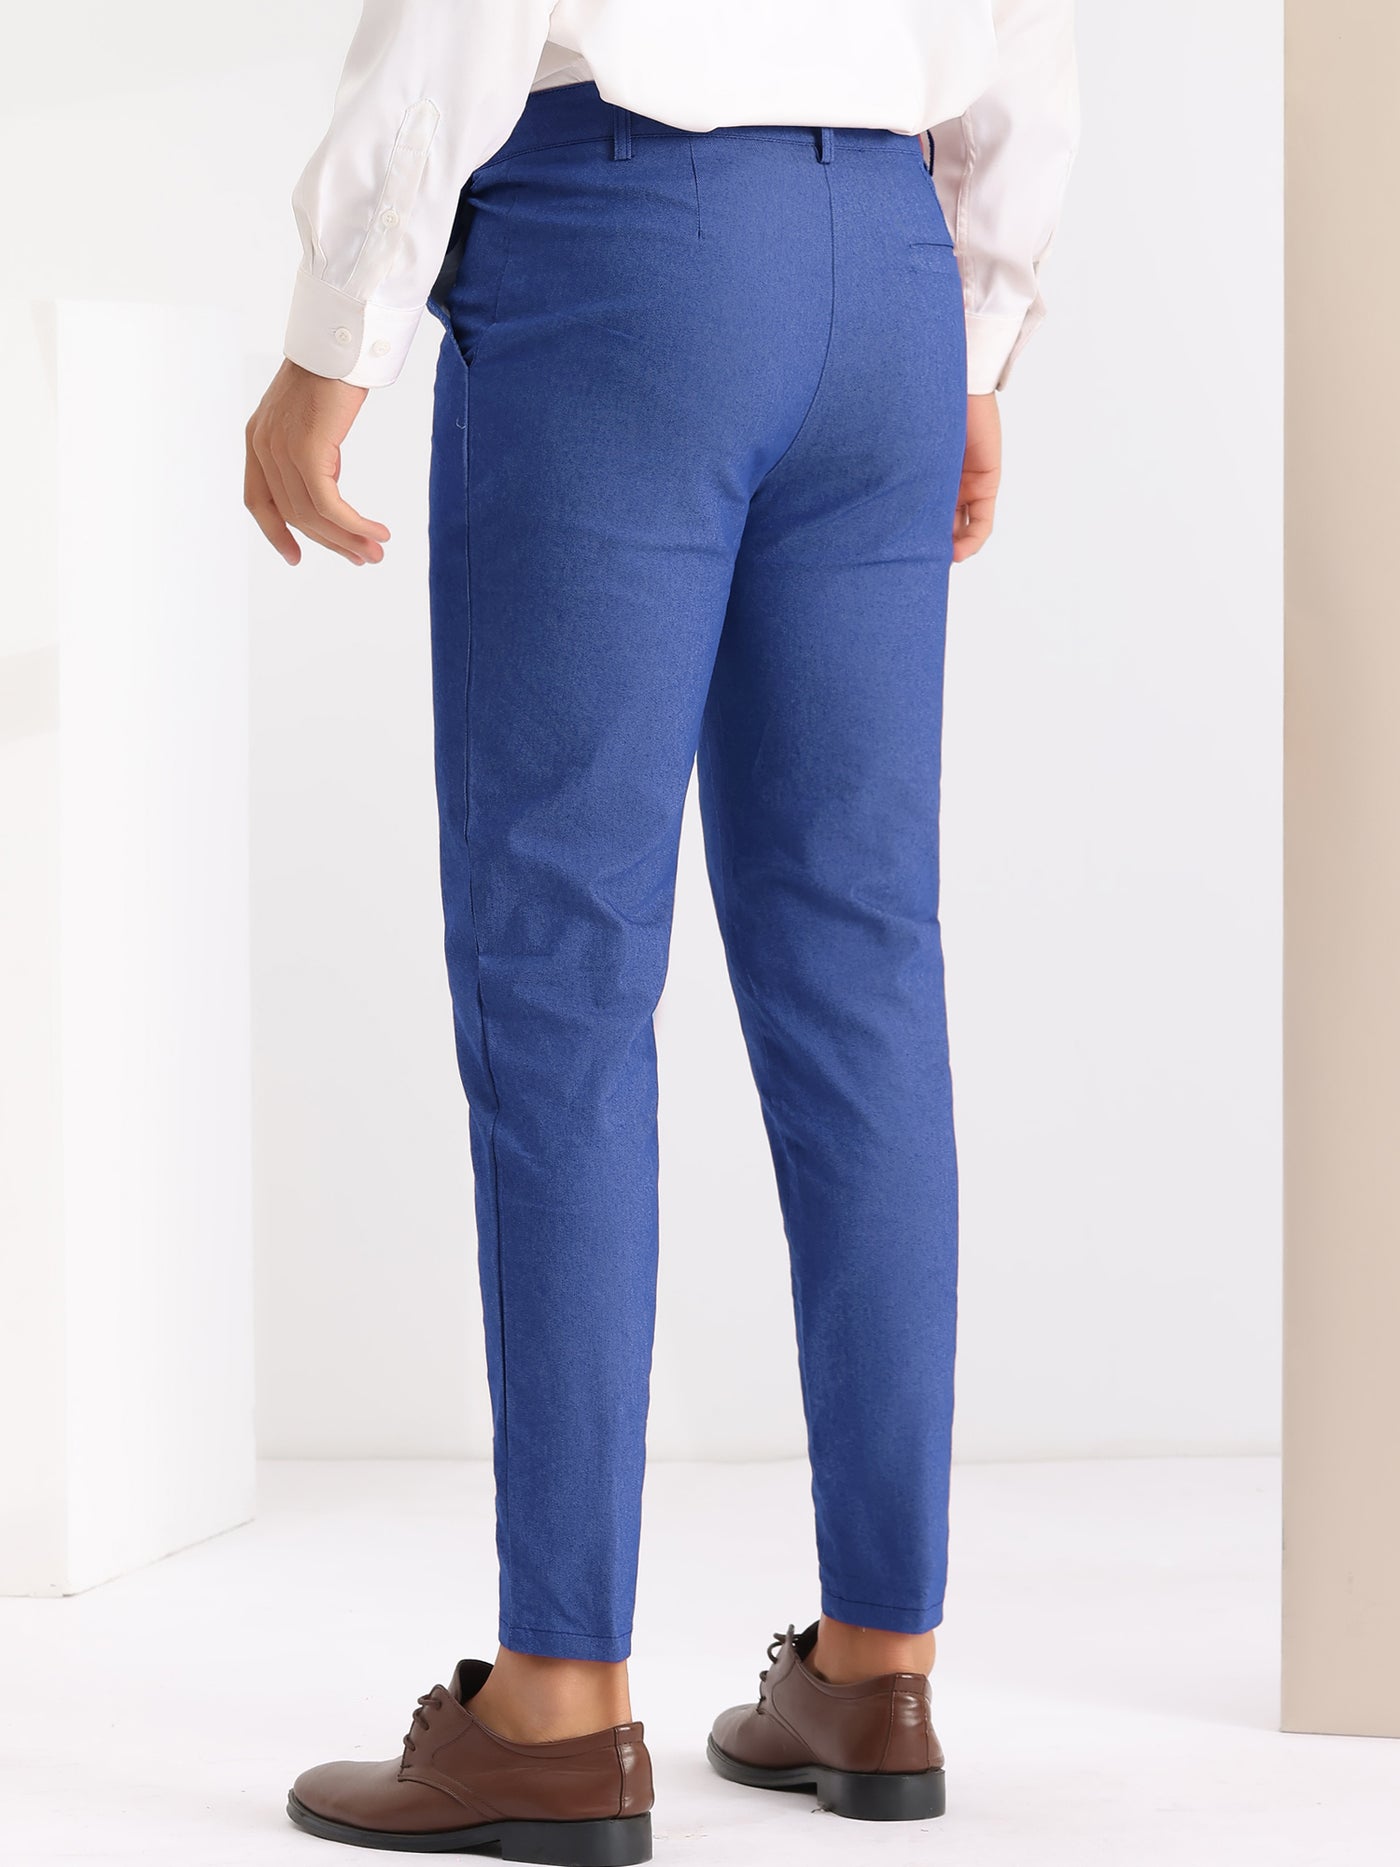 Bublédon Dress Pants for Men's Slim Fit Flat Front Business Prom Skinny Tapered Chino Trousers